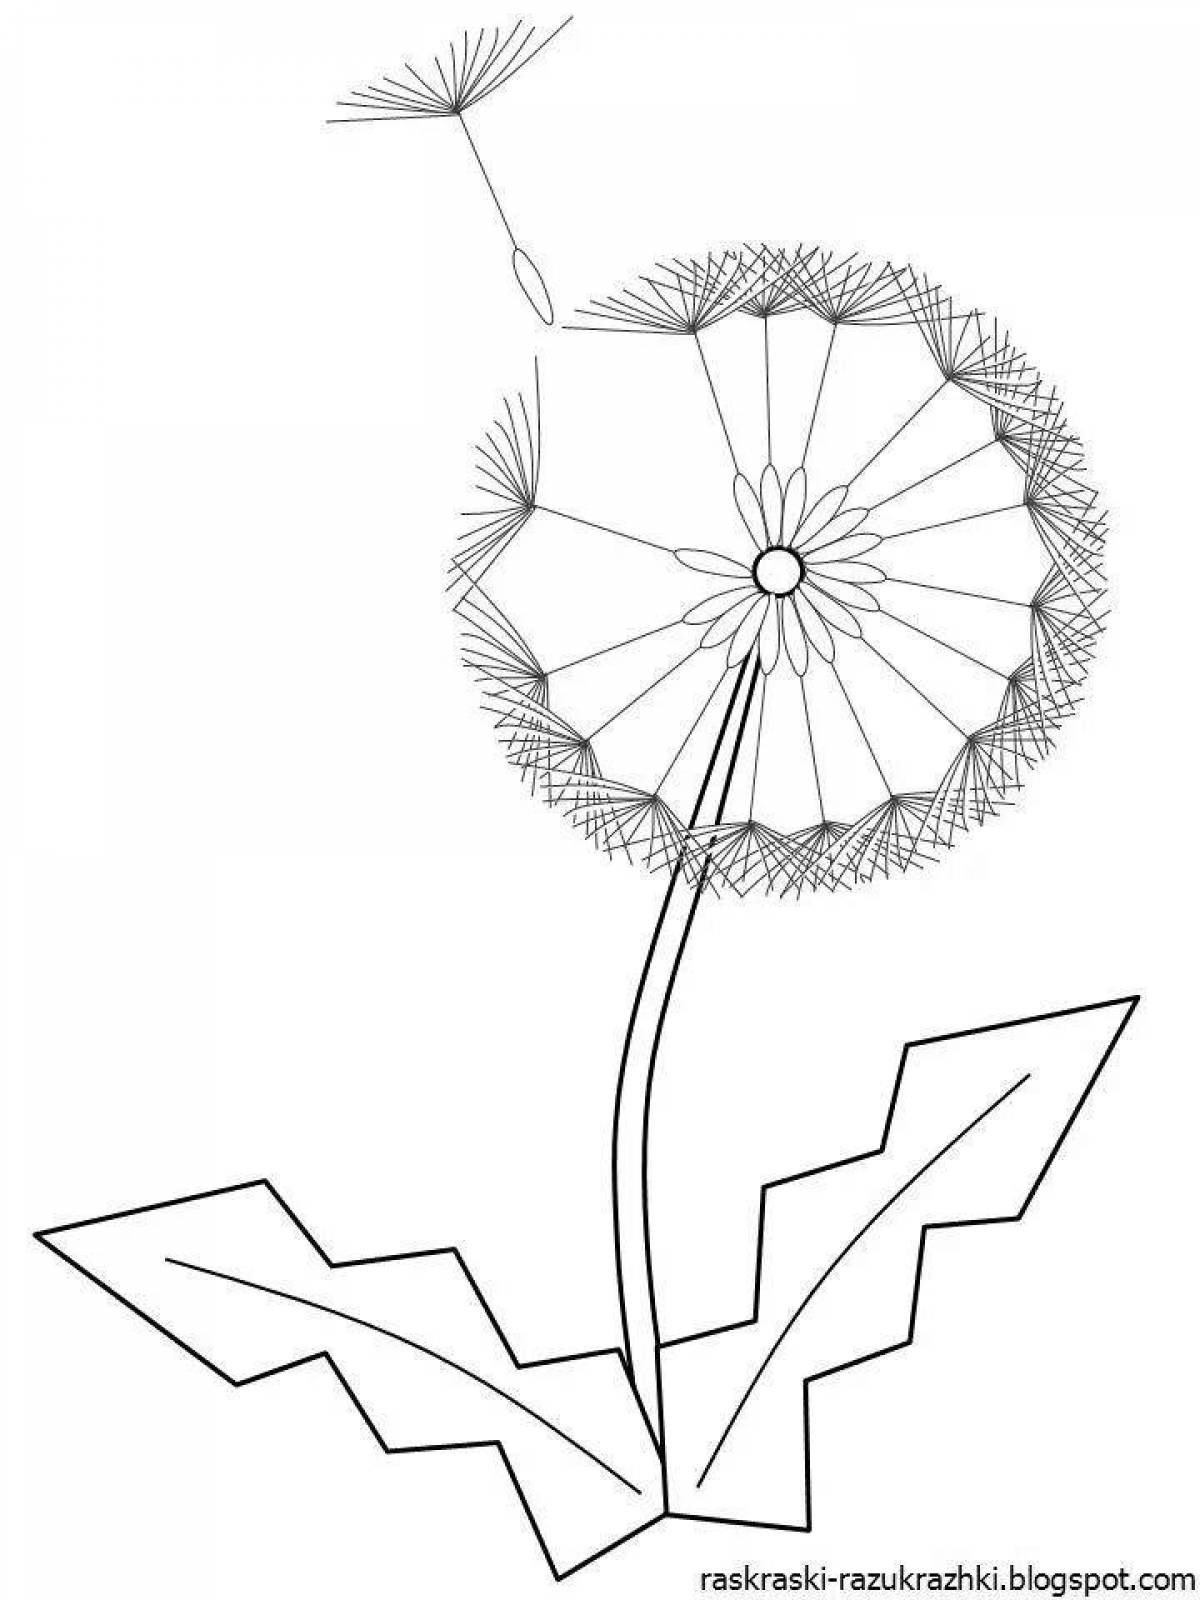 Live dandelion coloring page for kids